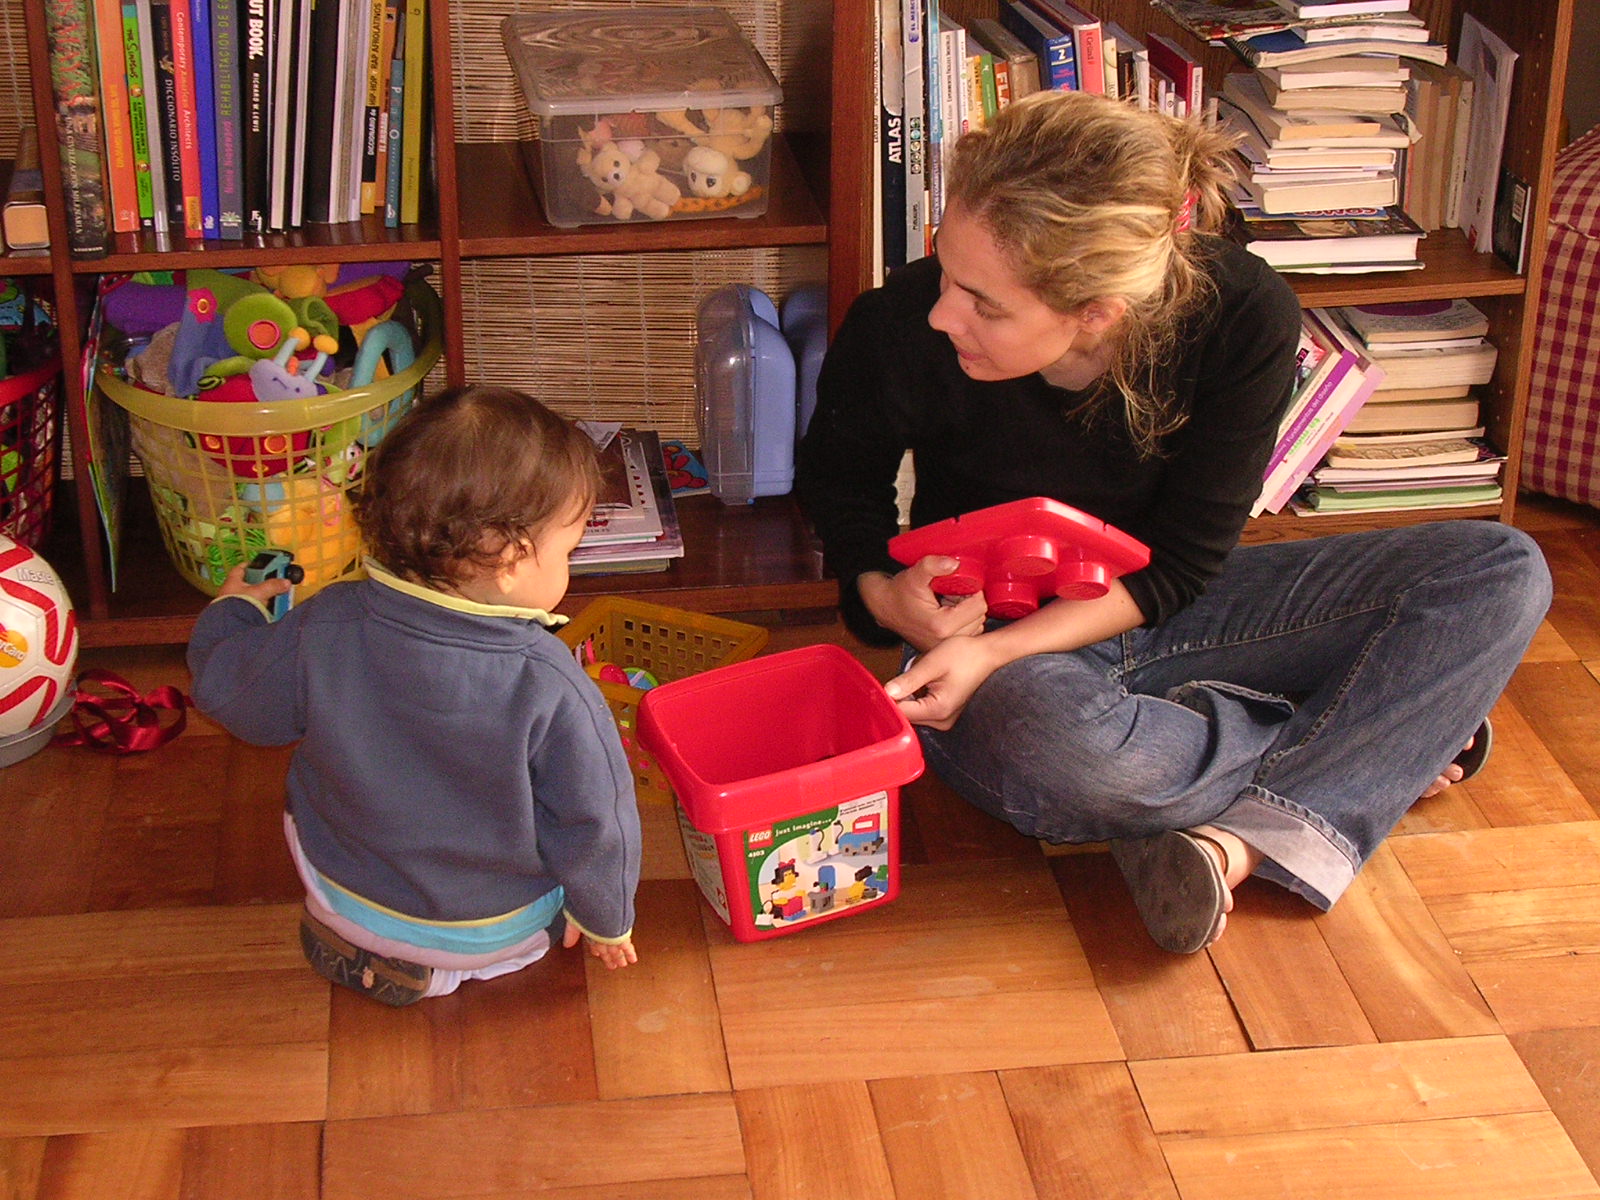 a woman sitting next to a toddler with a red box on its lap